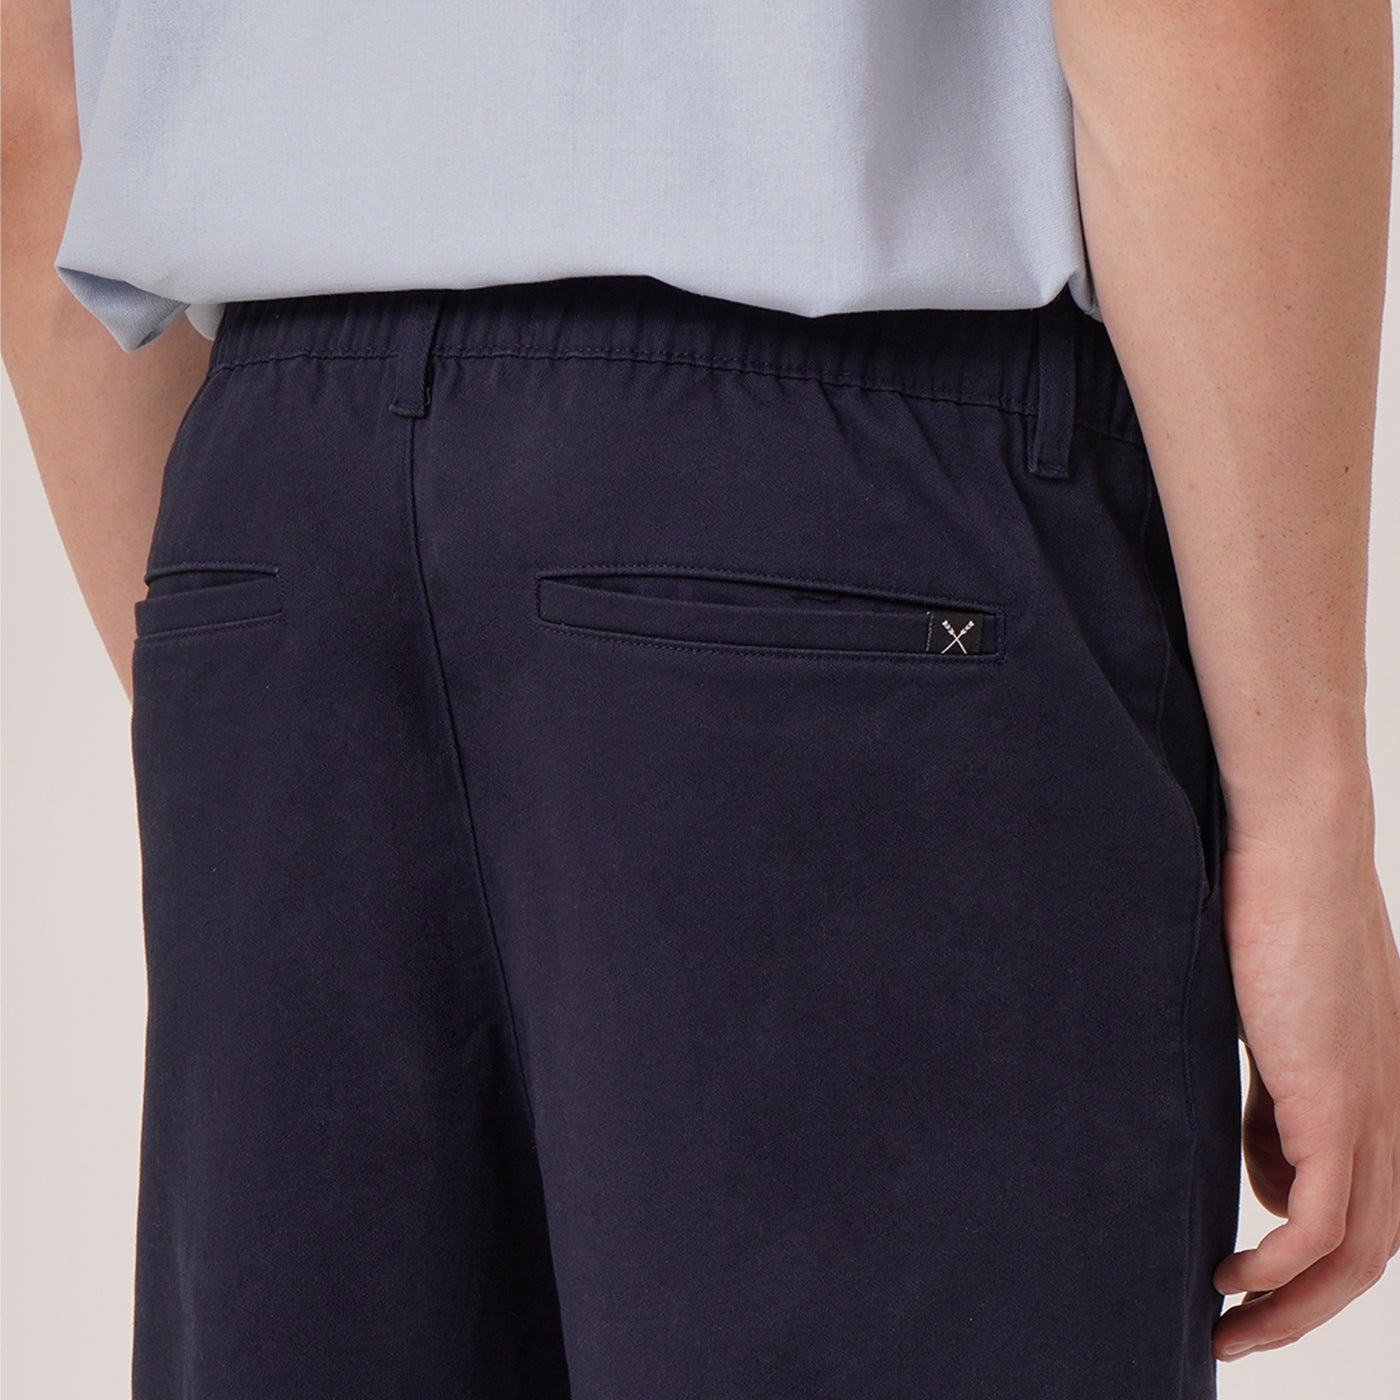 Relaxed Fit Cotton Trousers